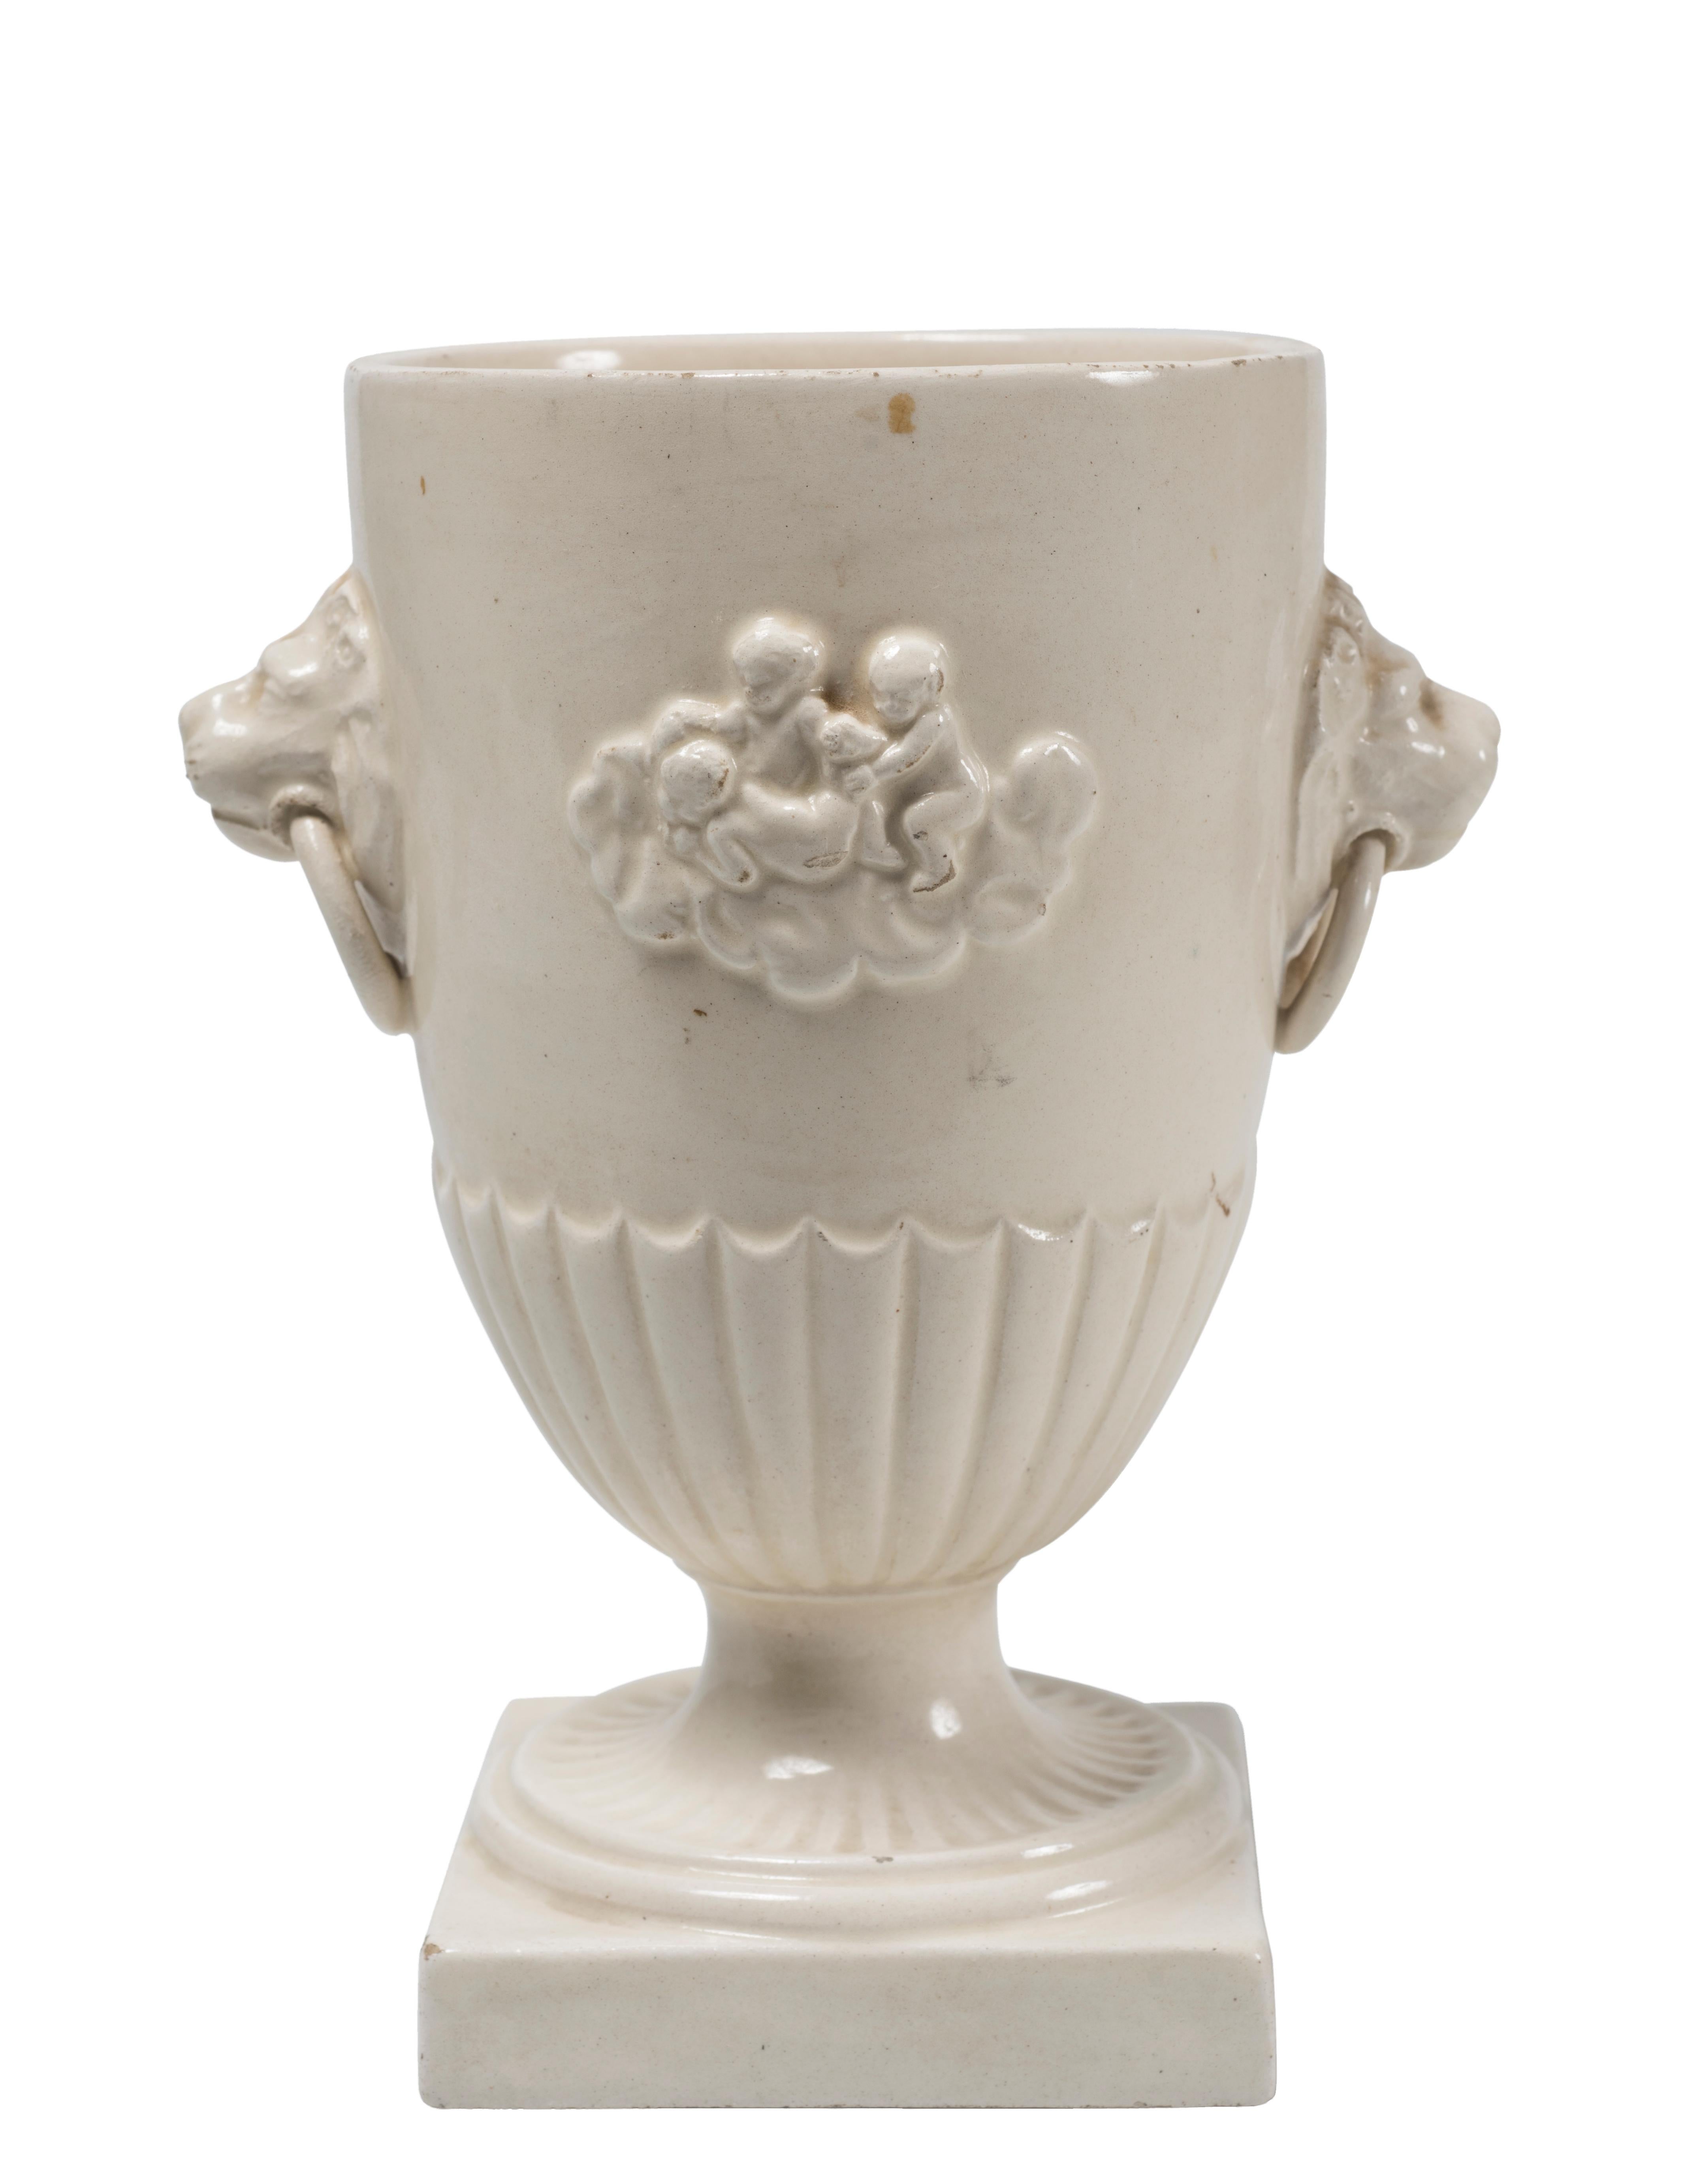 White Chalice cup is an original decorative object realized in the 19th century by the Giustiniani manufacture in Naples, Italy.

Del Vecchio factory. The artwork is realized in white earthenware decorated by reliefs on each side.

Very good